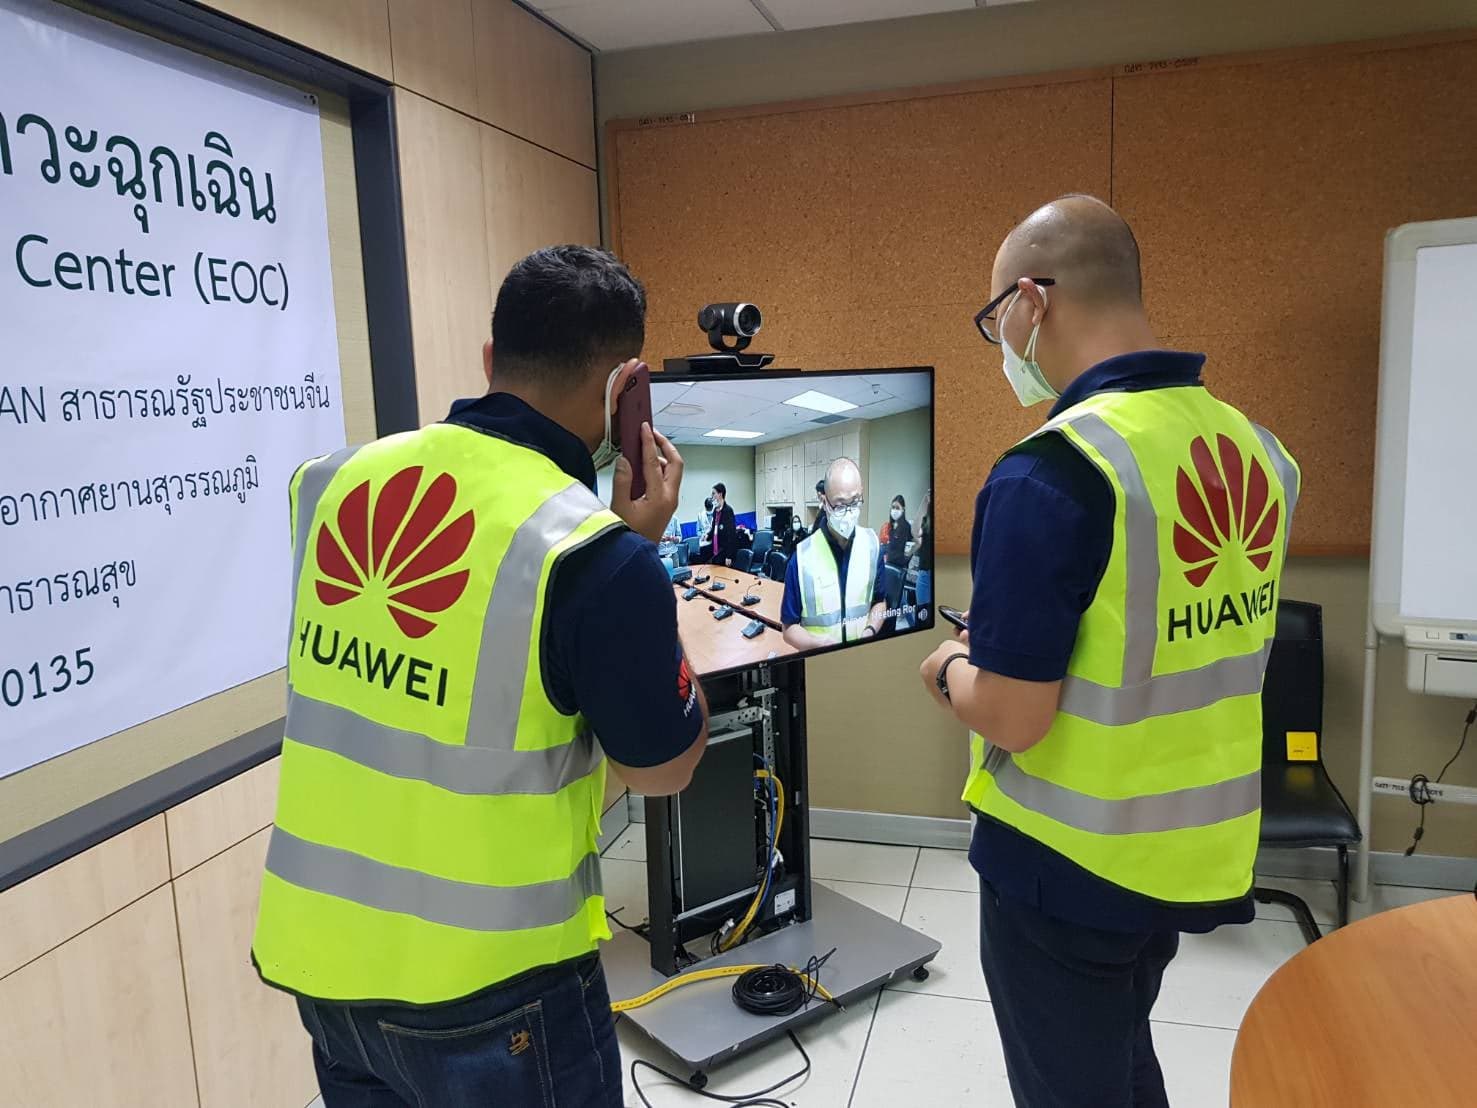 Two Huawei engineers set up a Telemedicine Video Conference Solution, donated to Thailand by Huawei to combat COVID-19